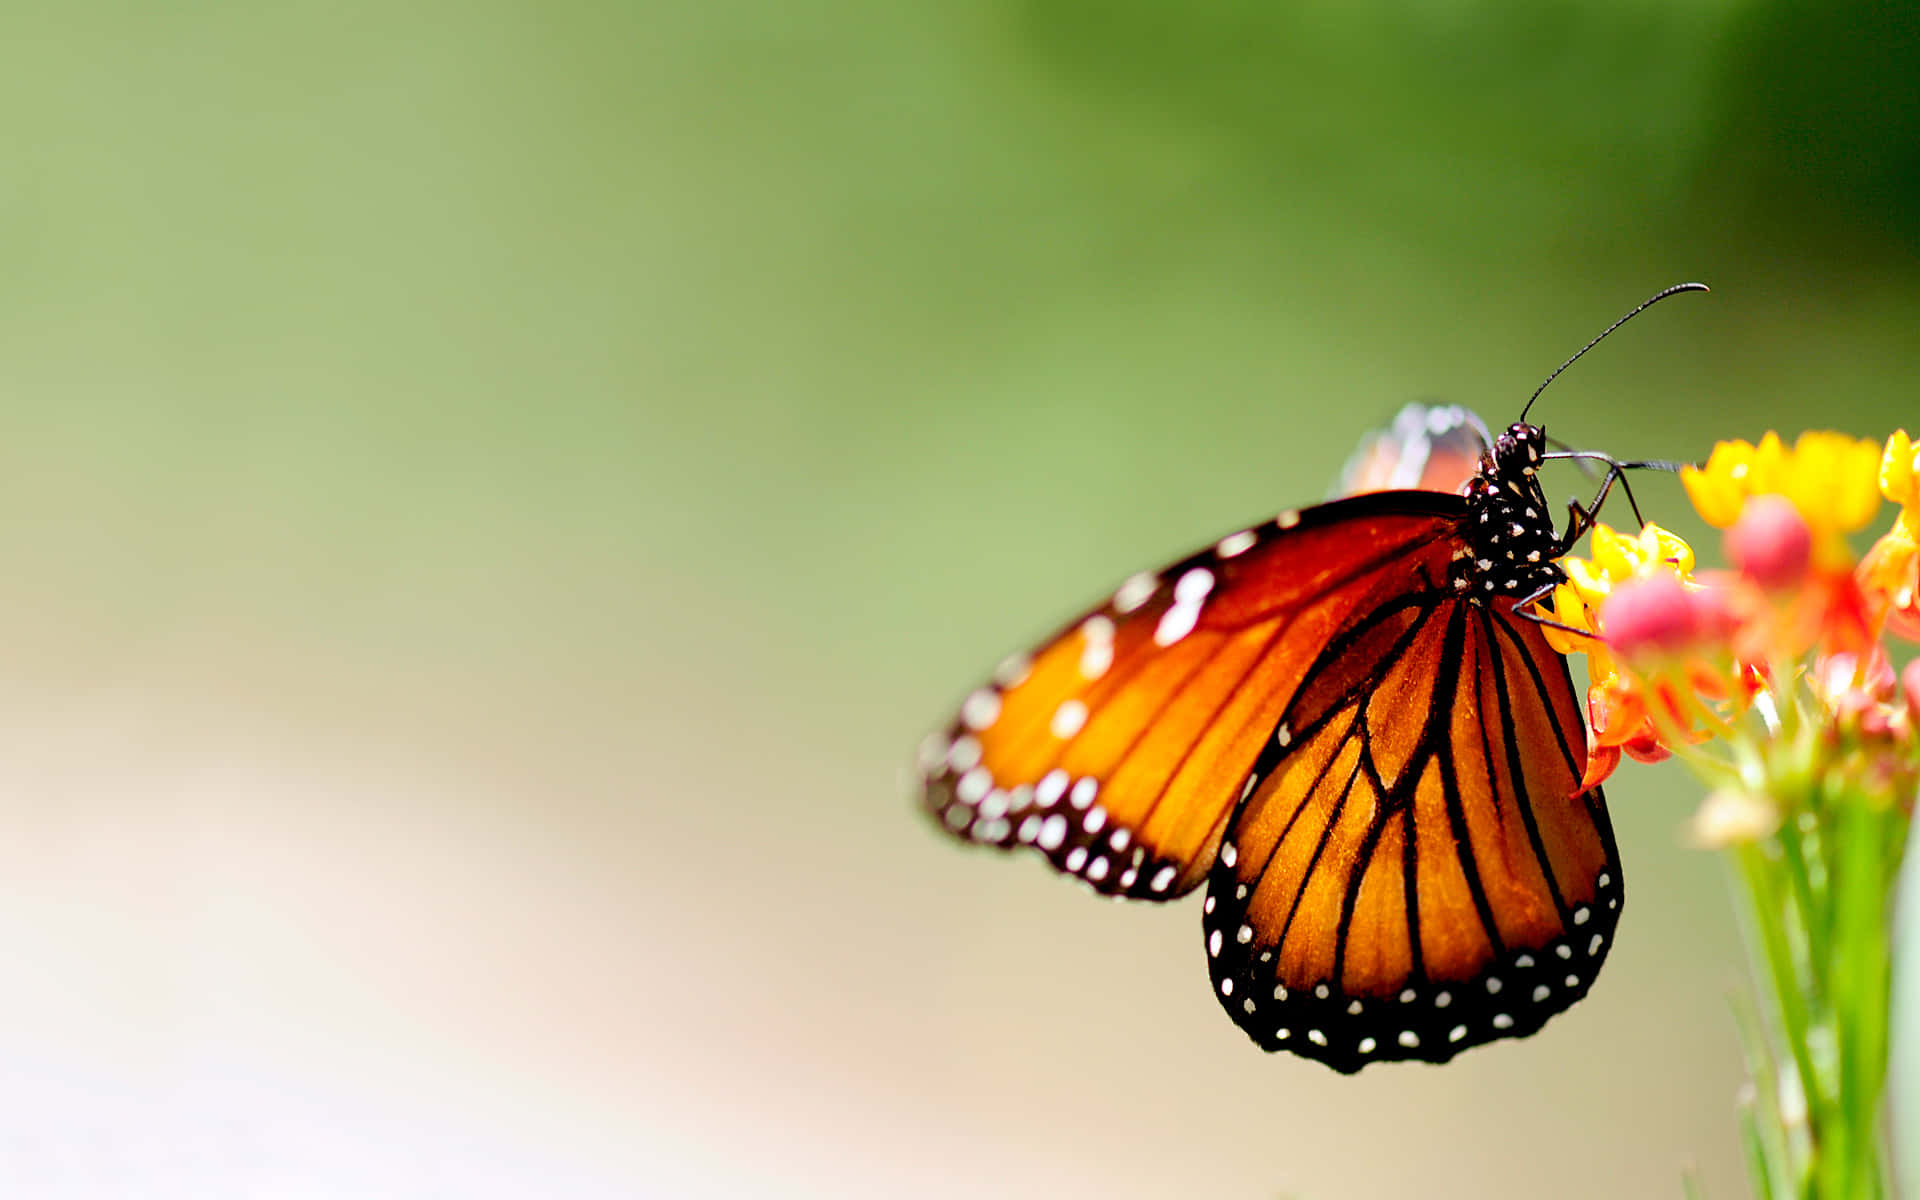 Visit the Butterfly Zoo and marvel at the variety and beauty of these delicate creatures. Wallpaper